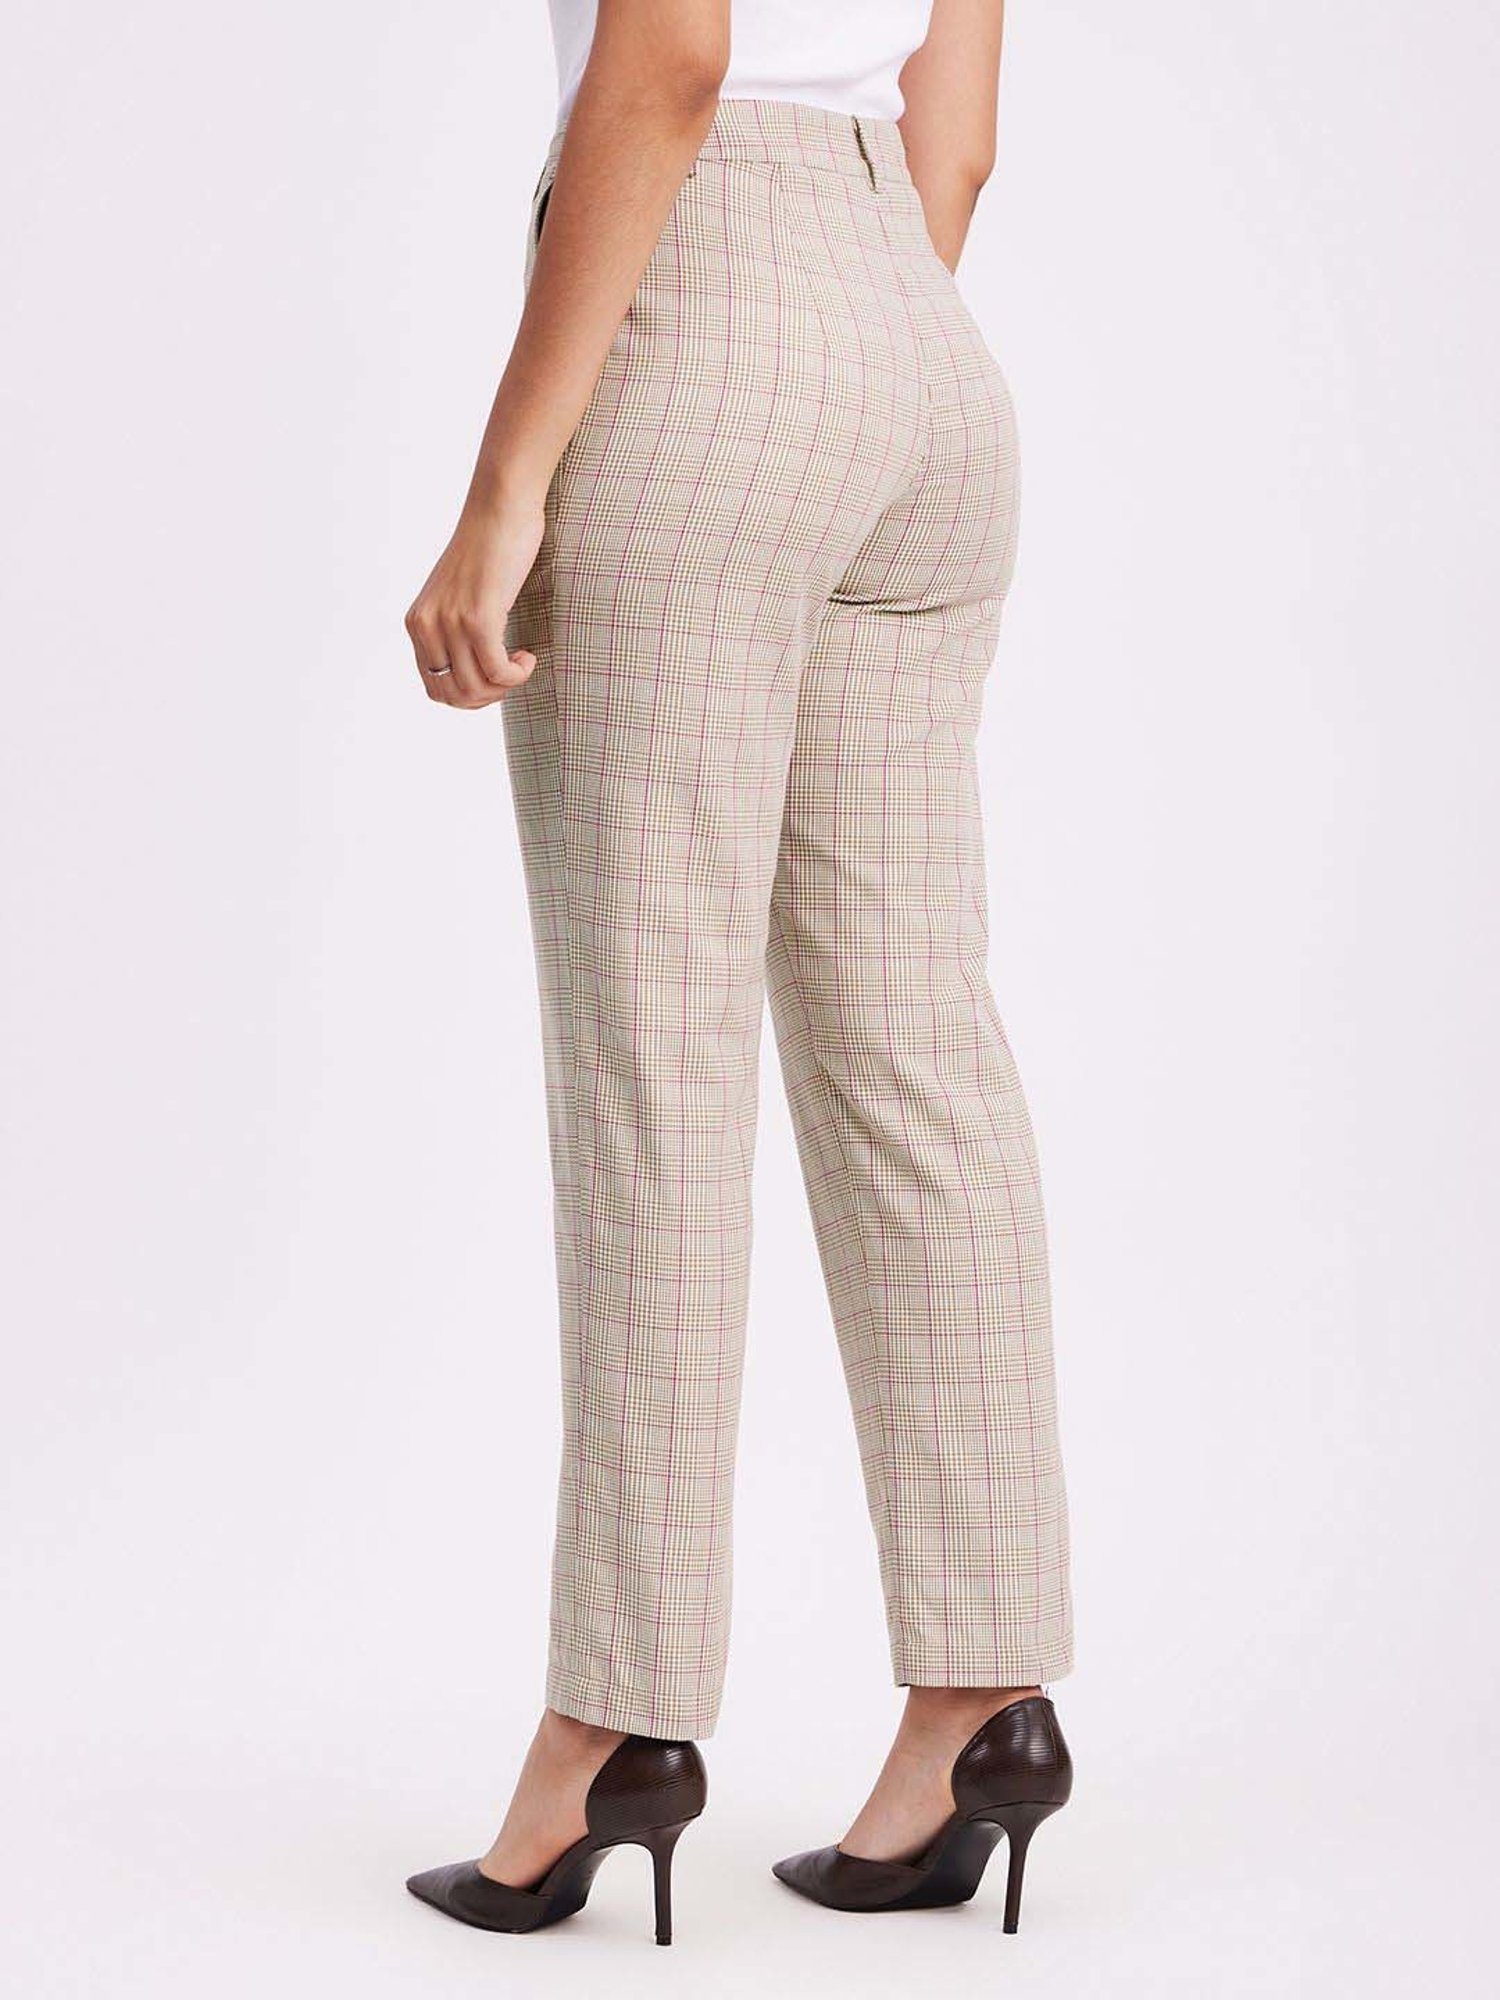 Checkered Pants Outfits: Best Looks To Try 2023